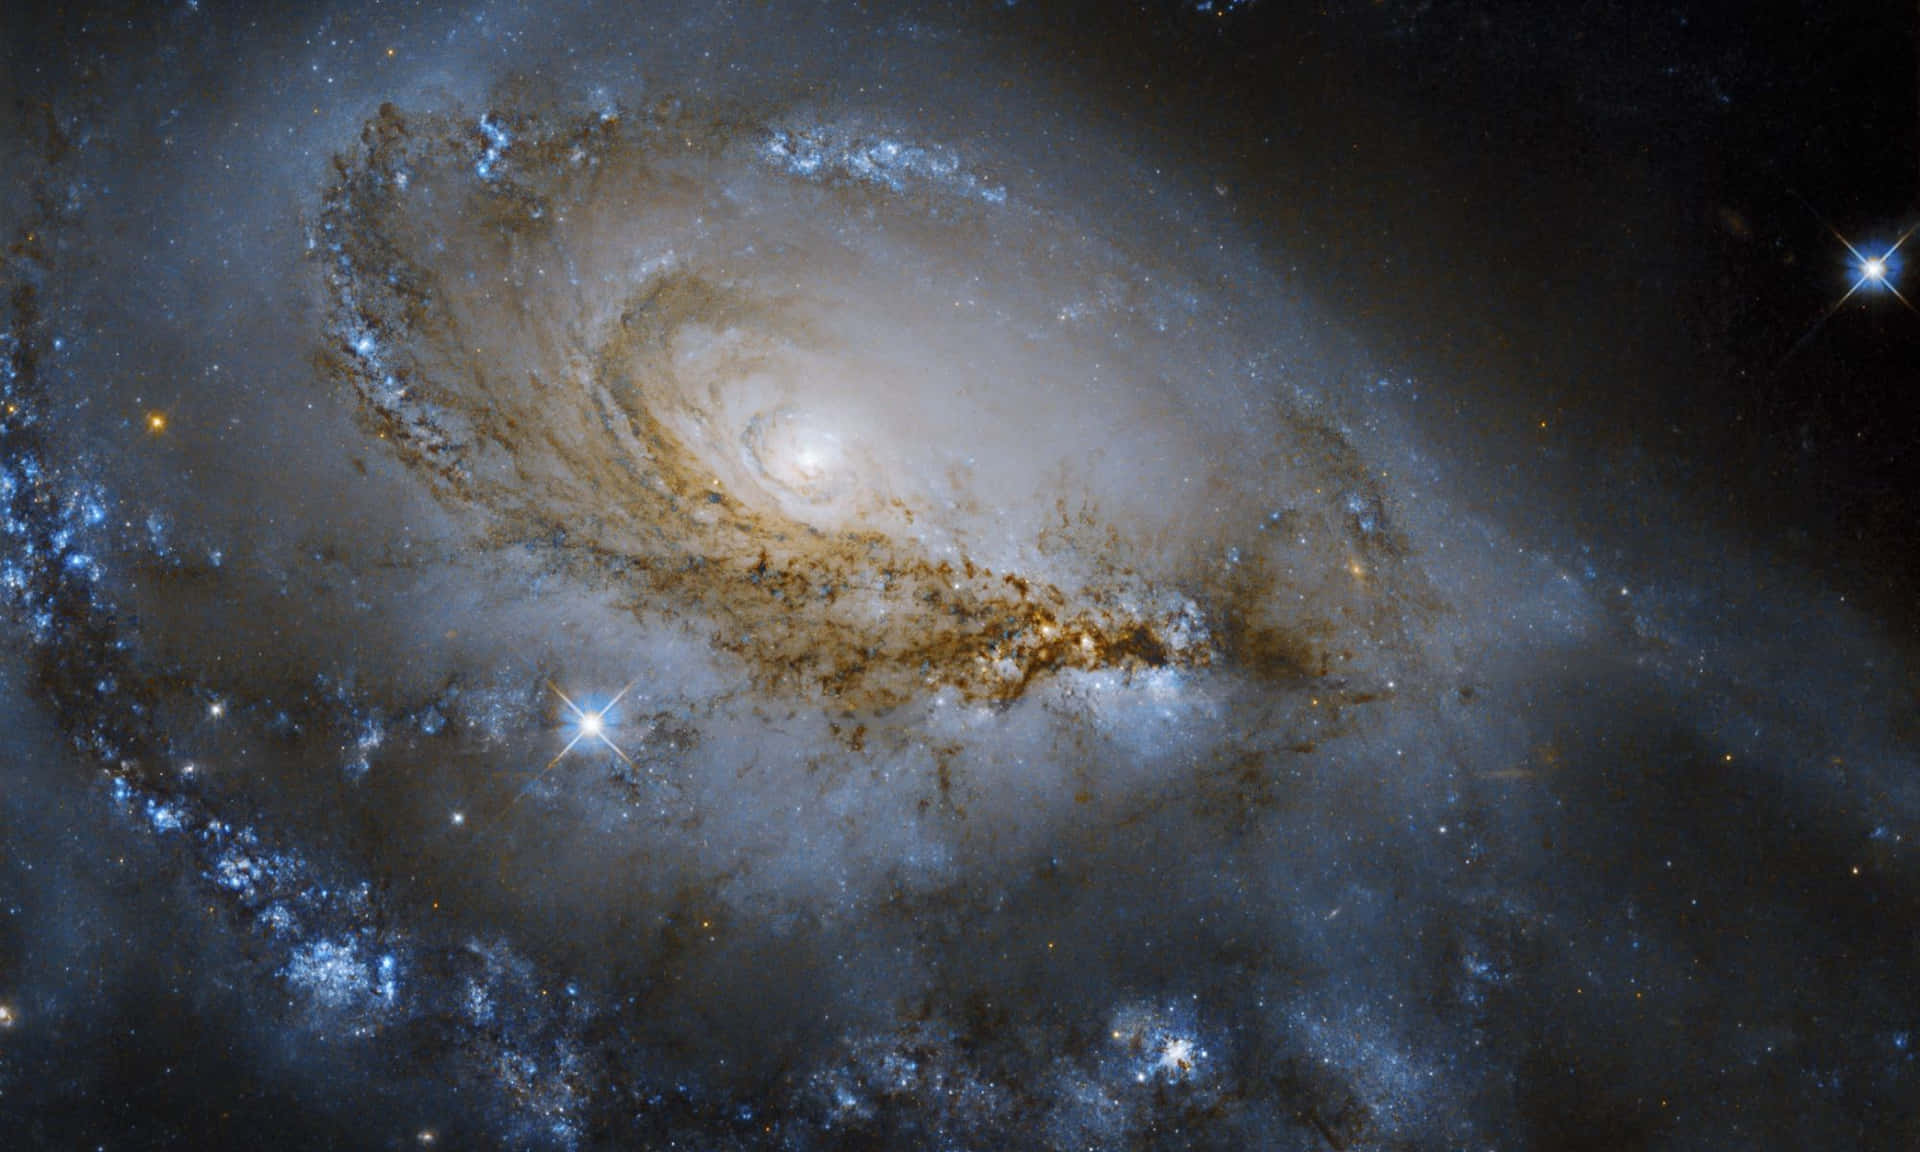 Peering into the depths of space with the Hubble Telescope